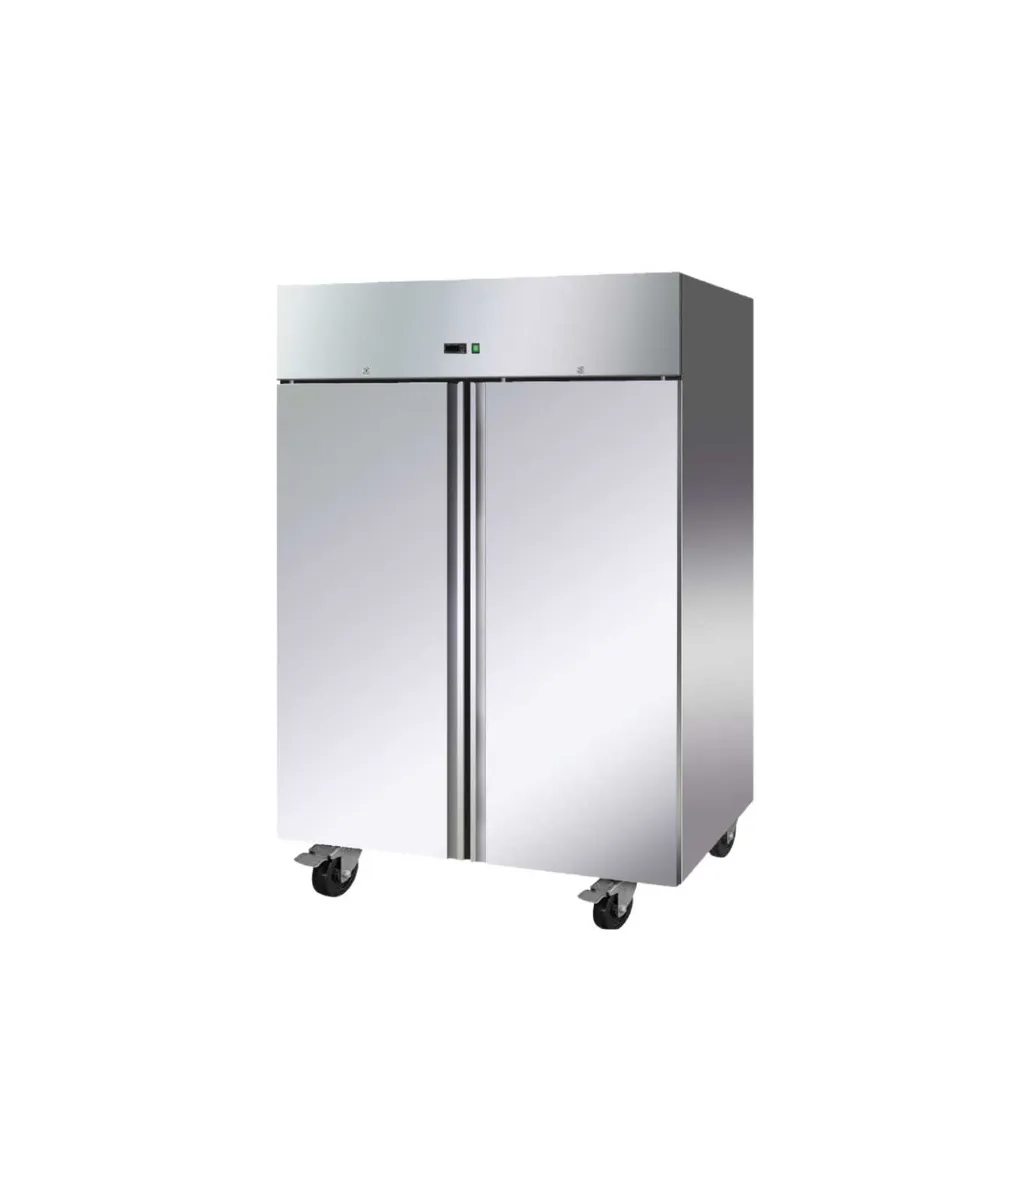 Stainless Steel Fridge Double Door A Energy Rated